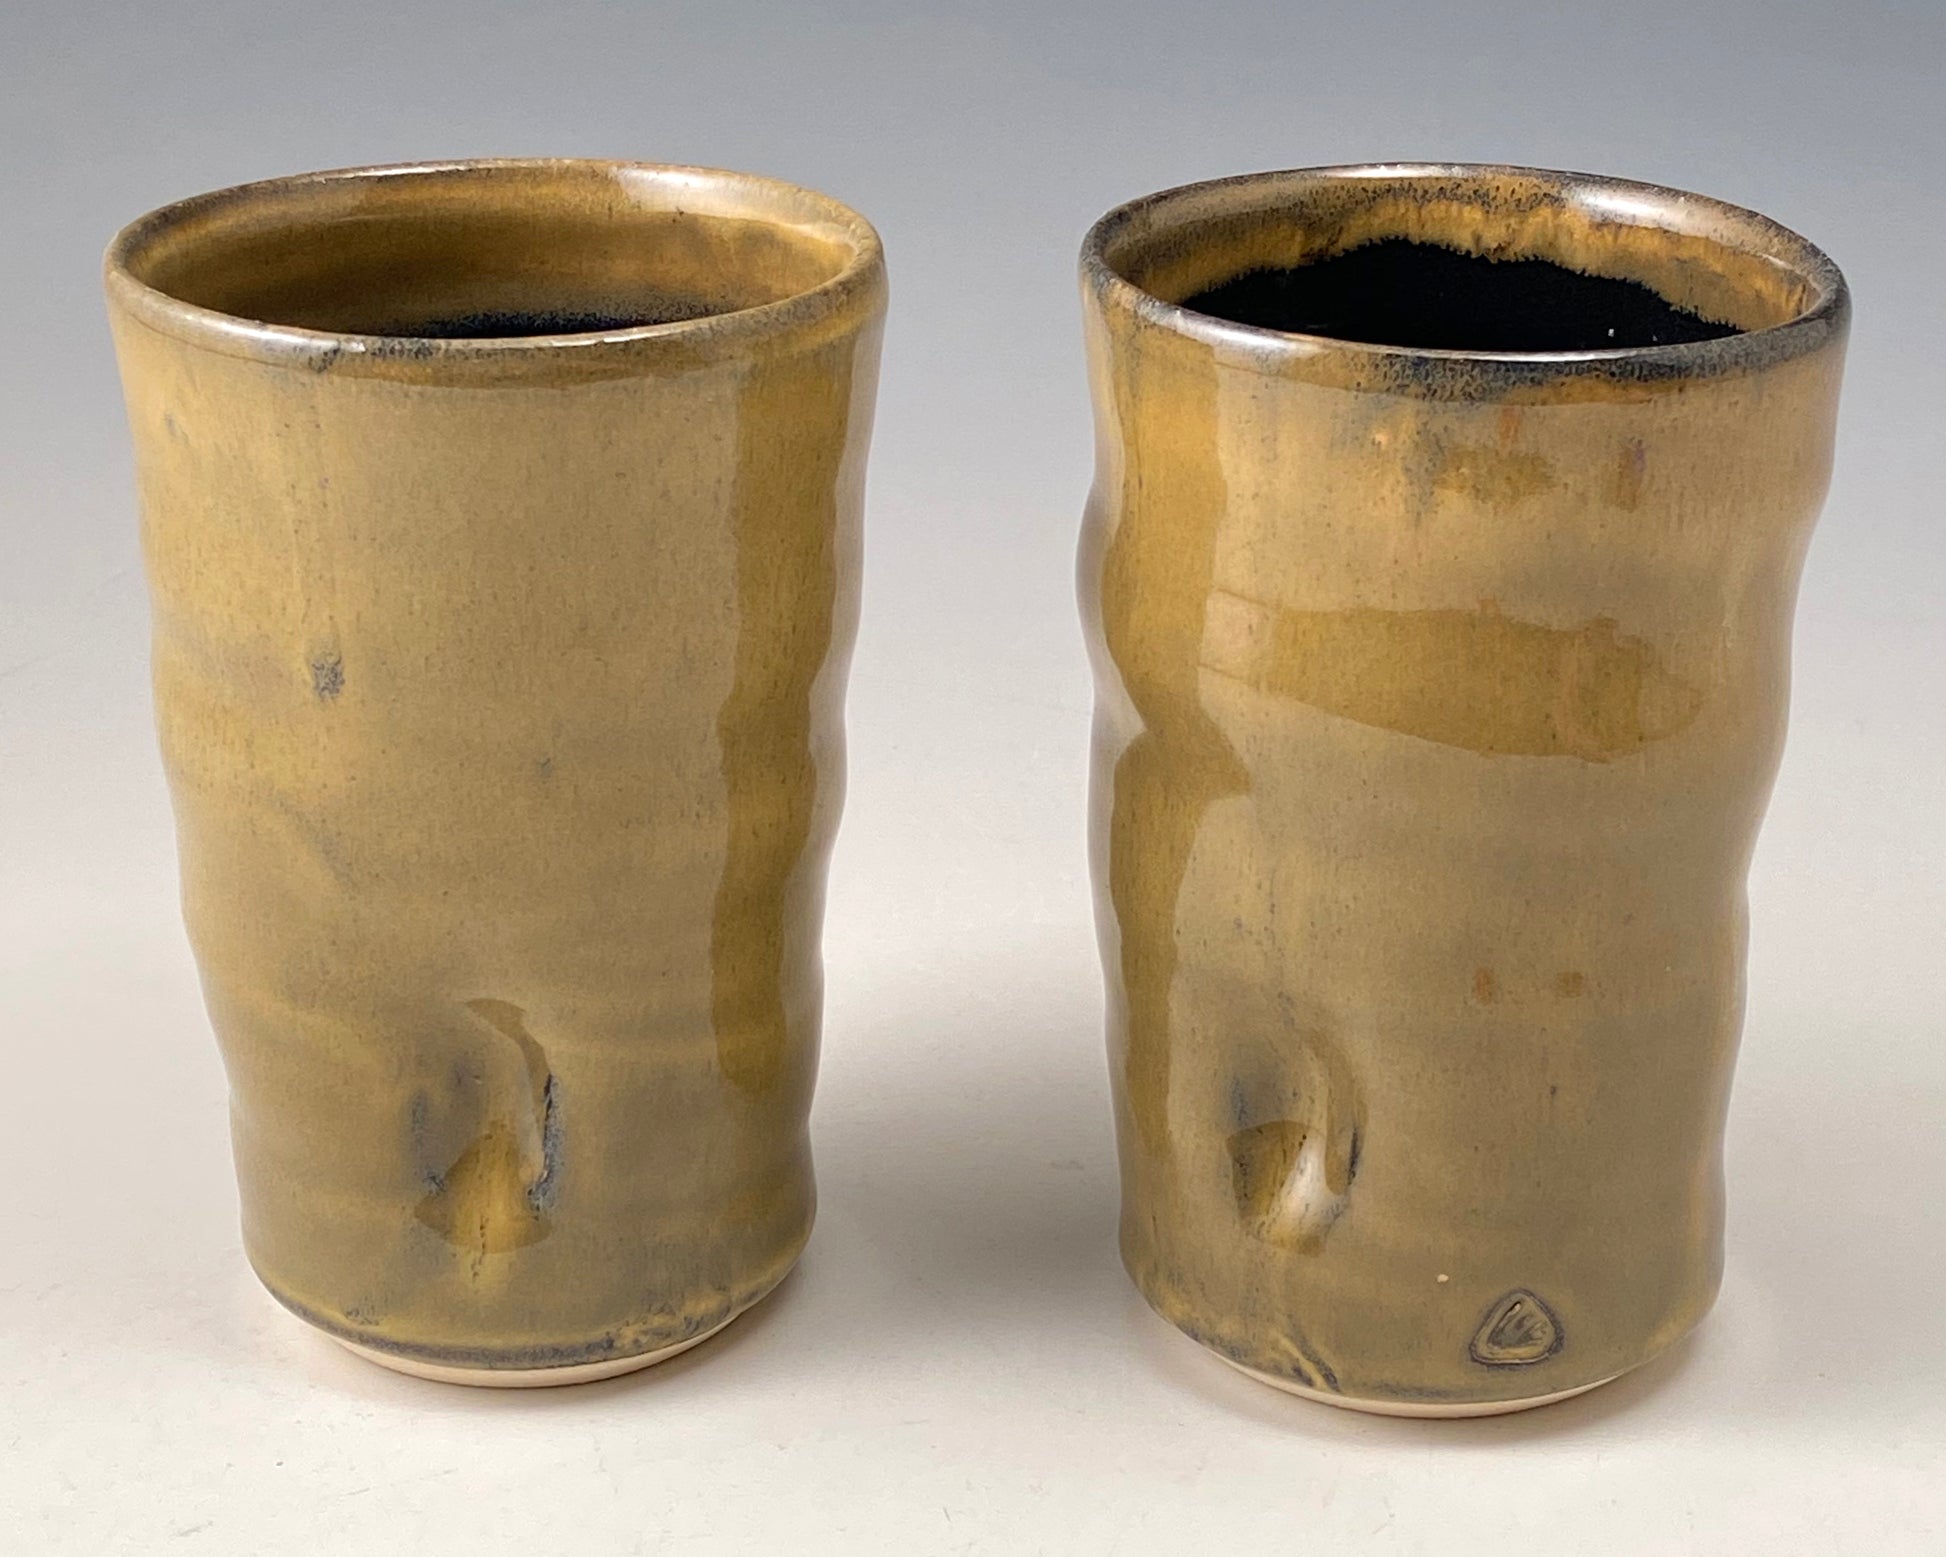 Handmade Pottery. Stoneware cups with amber-colored glaze on exterior. Black glaze on interior.